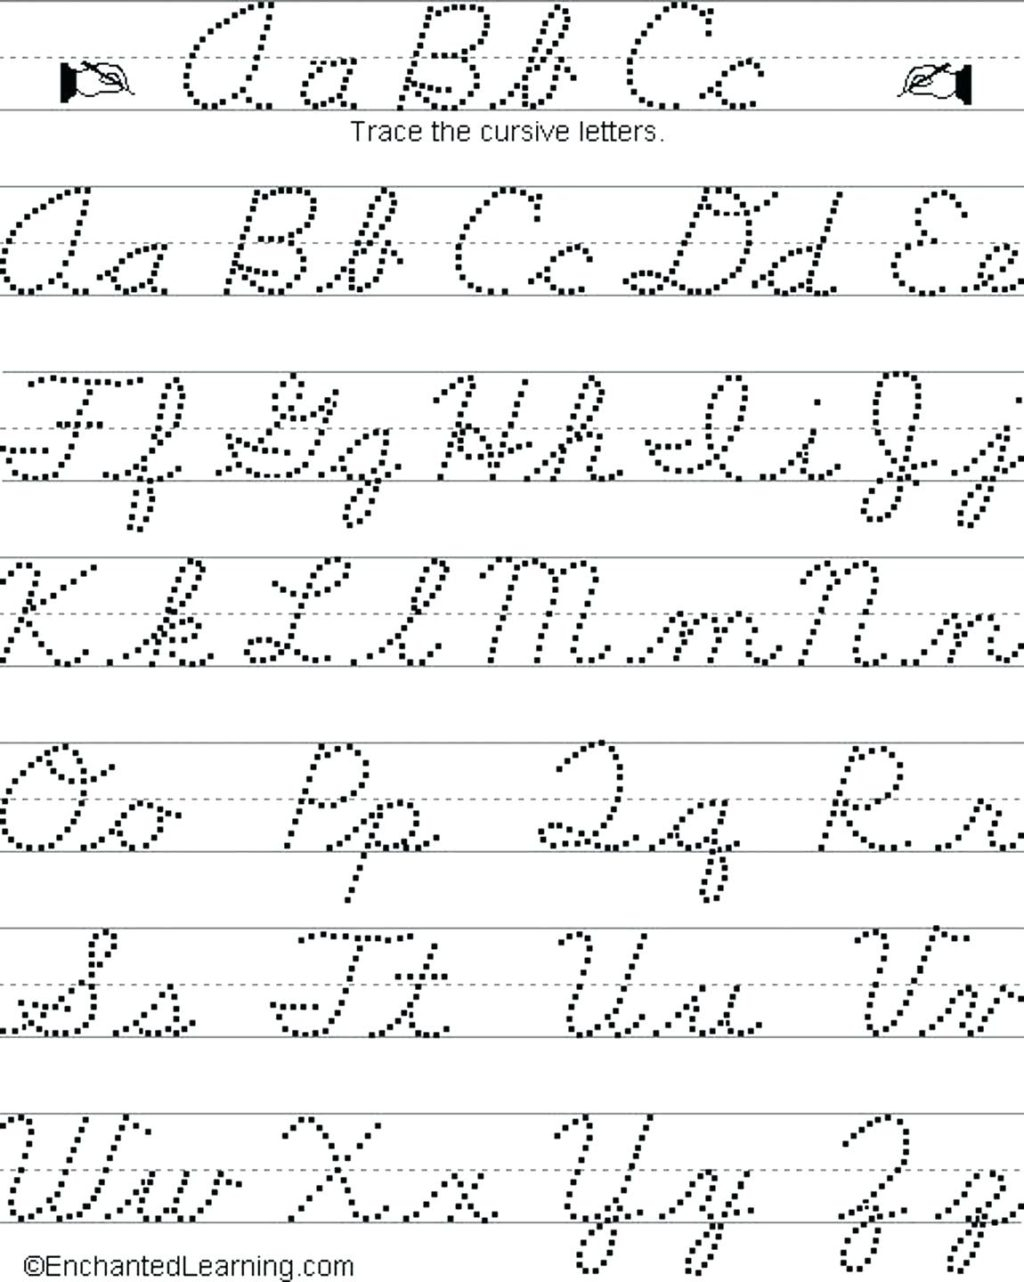 cursive-handwriting-tracing-worksheets-for-practice-letter-f-cursive